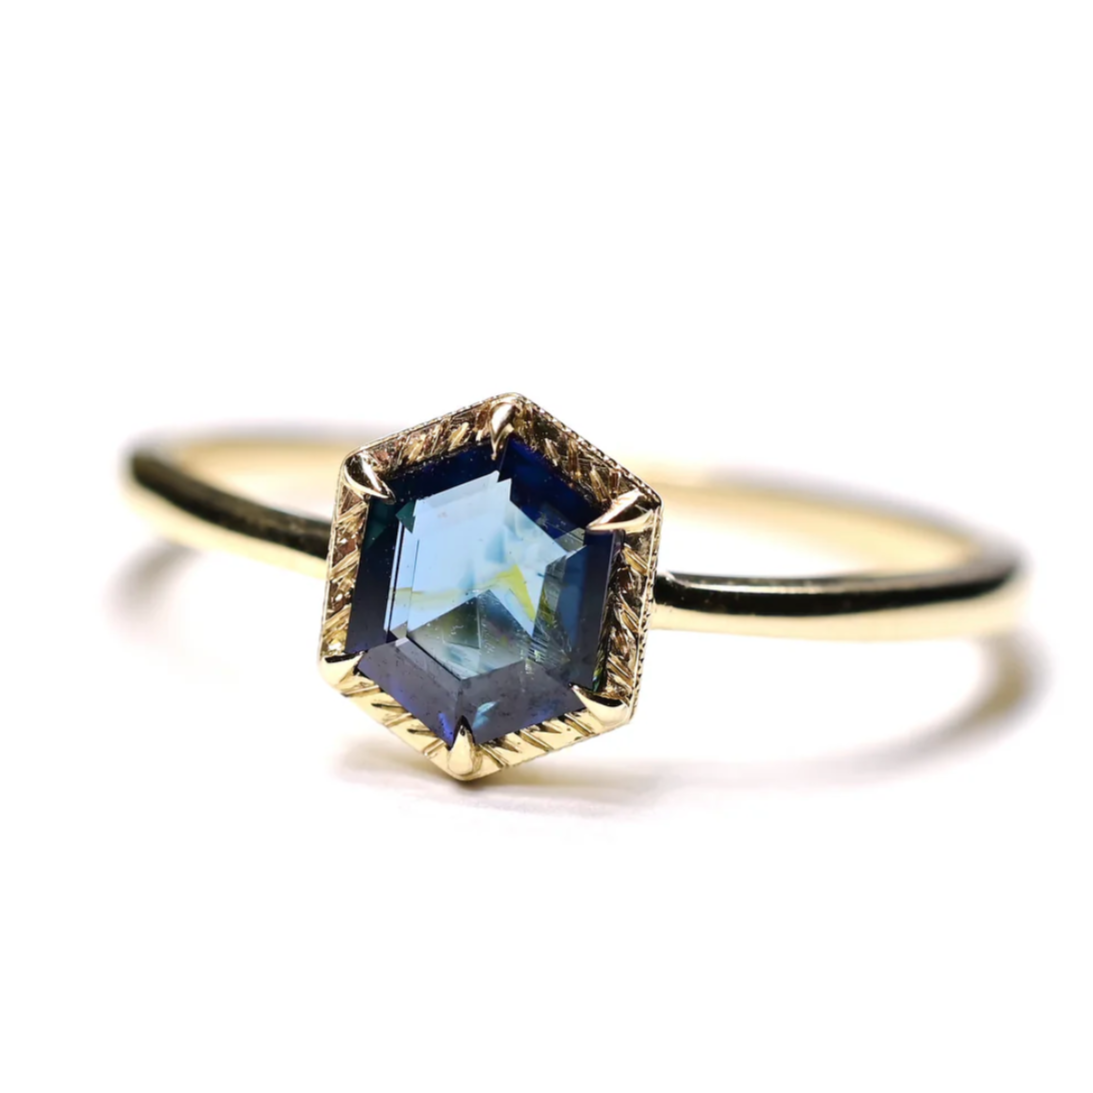 a 14k yellow gold solitaire ring with a hexagon blue spinel center stone with engraved gold details around the stone, sitting on a white background